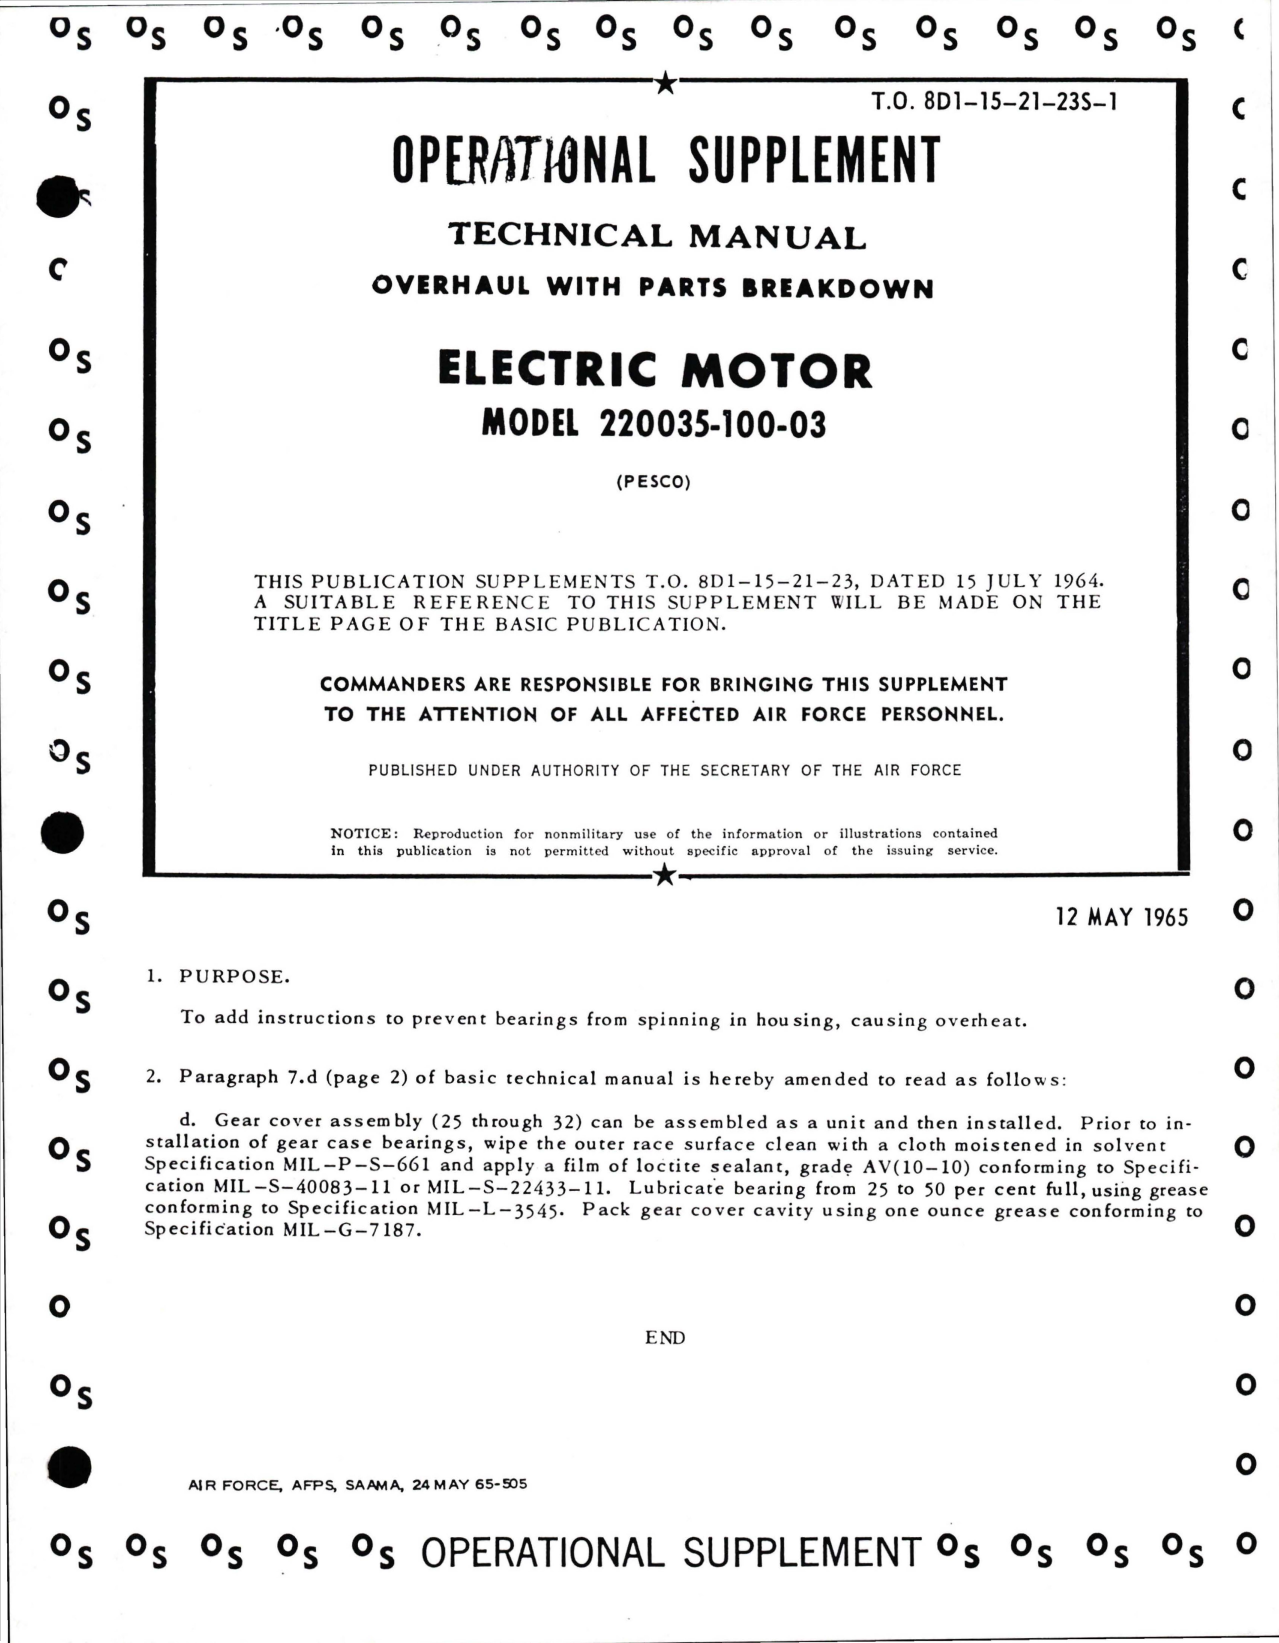 Sample page 1 from AirCorps Library document: Supplement to Overhaul with Parts Breakdown for Electric Motor - Model 220035-100-03